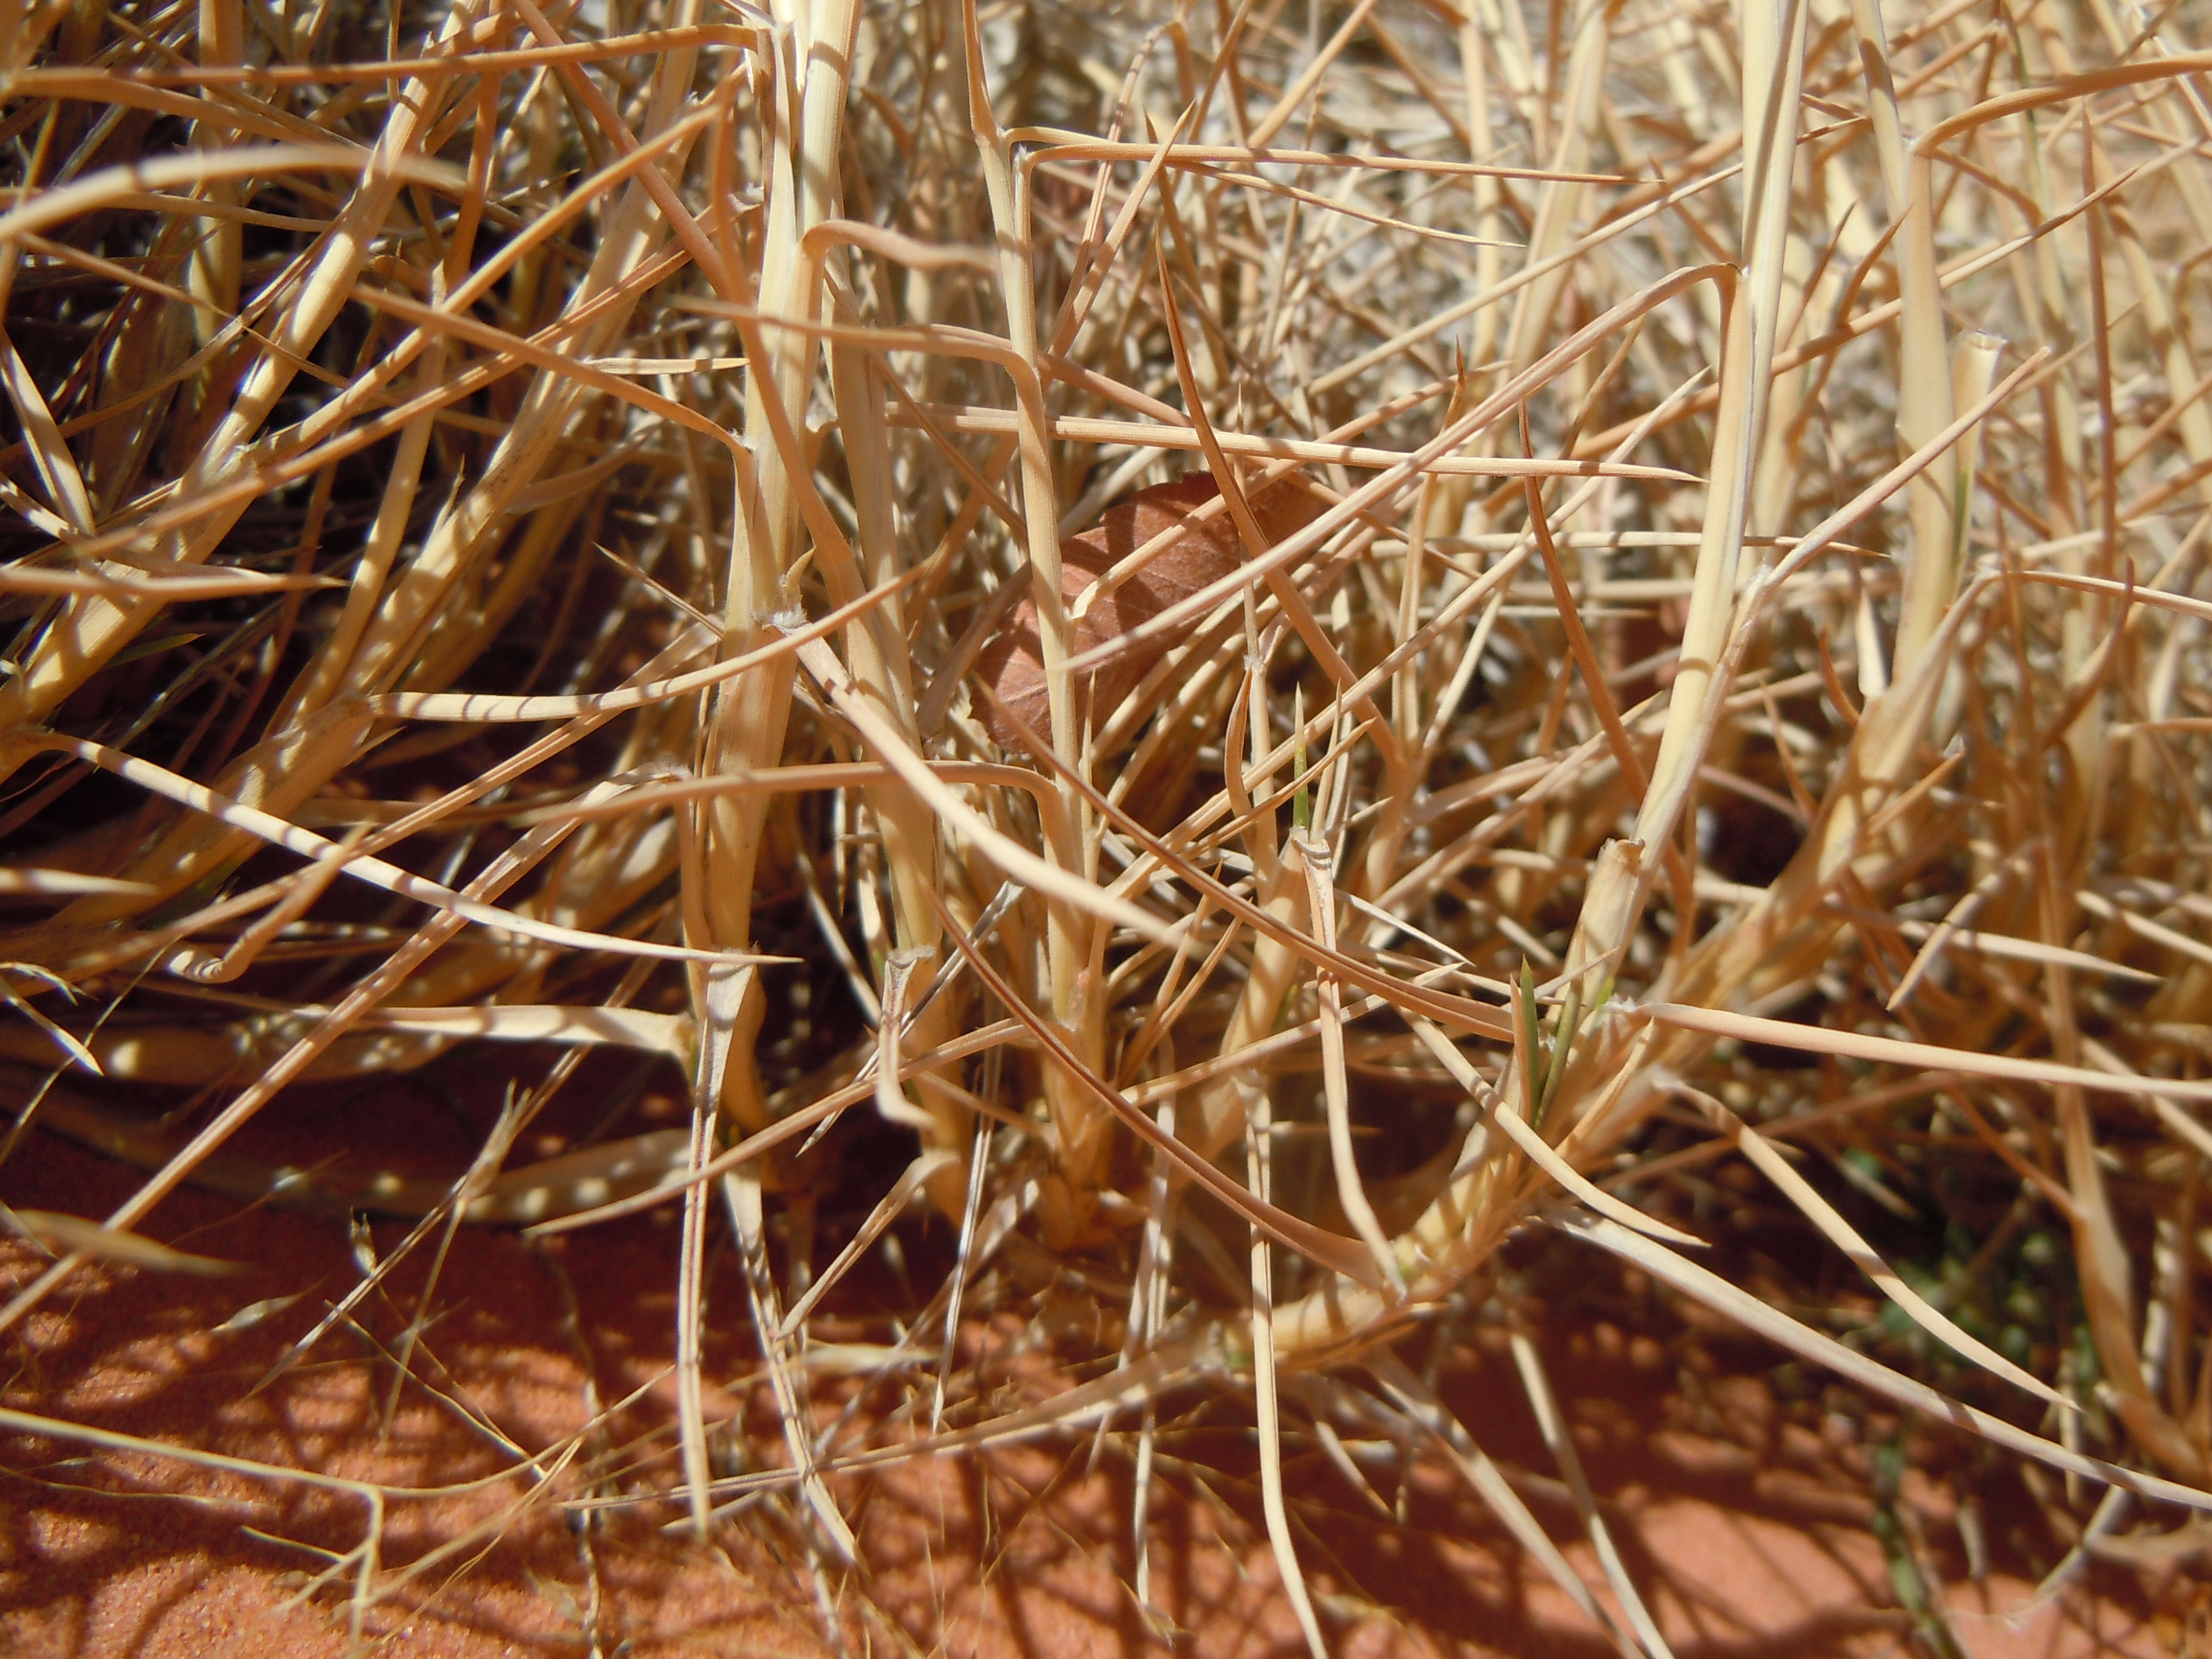 Dense, fibrous nature of the grass with its spines and tough leaf blades